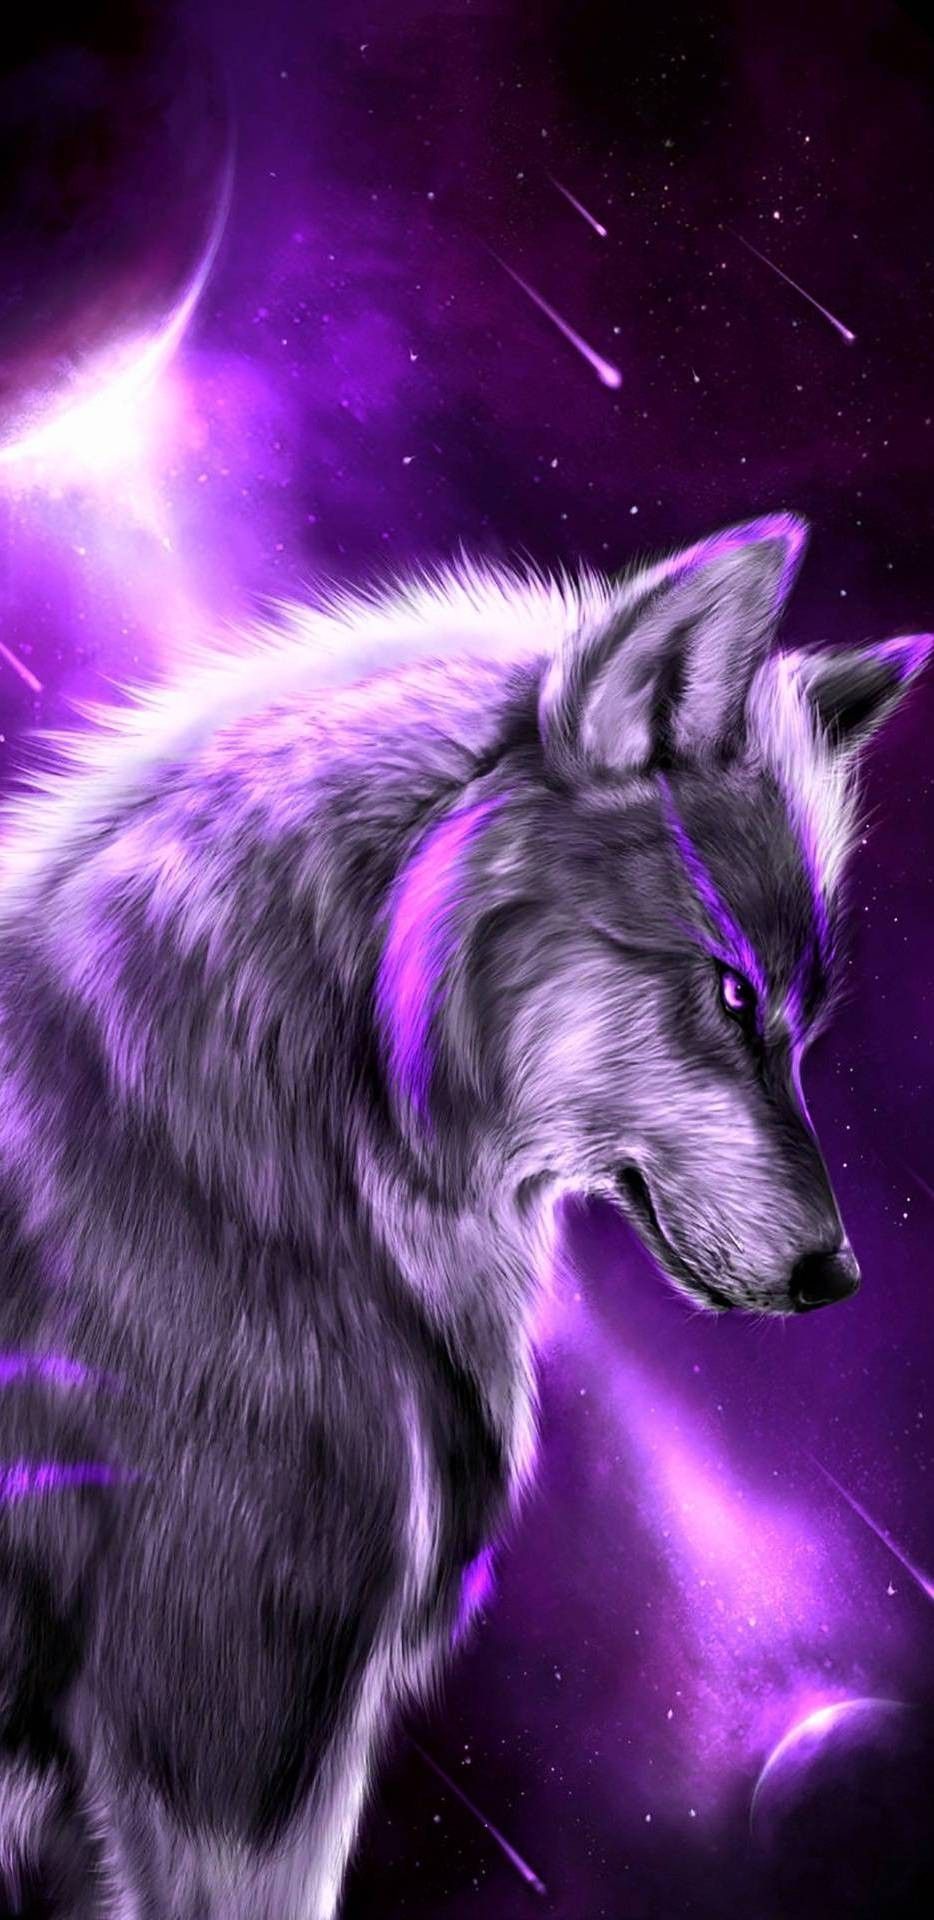 Cute Anime Wolf Wallpaper Nature. Wolf wallpaper, Wolf painting